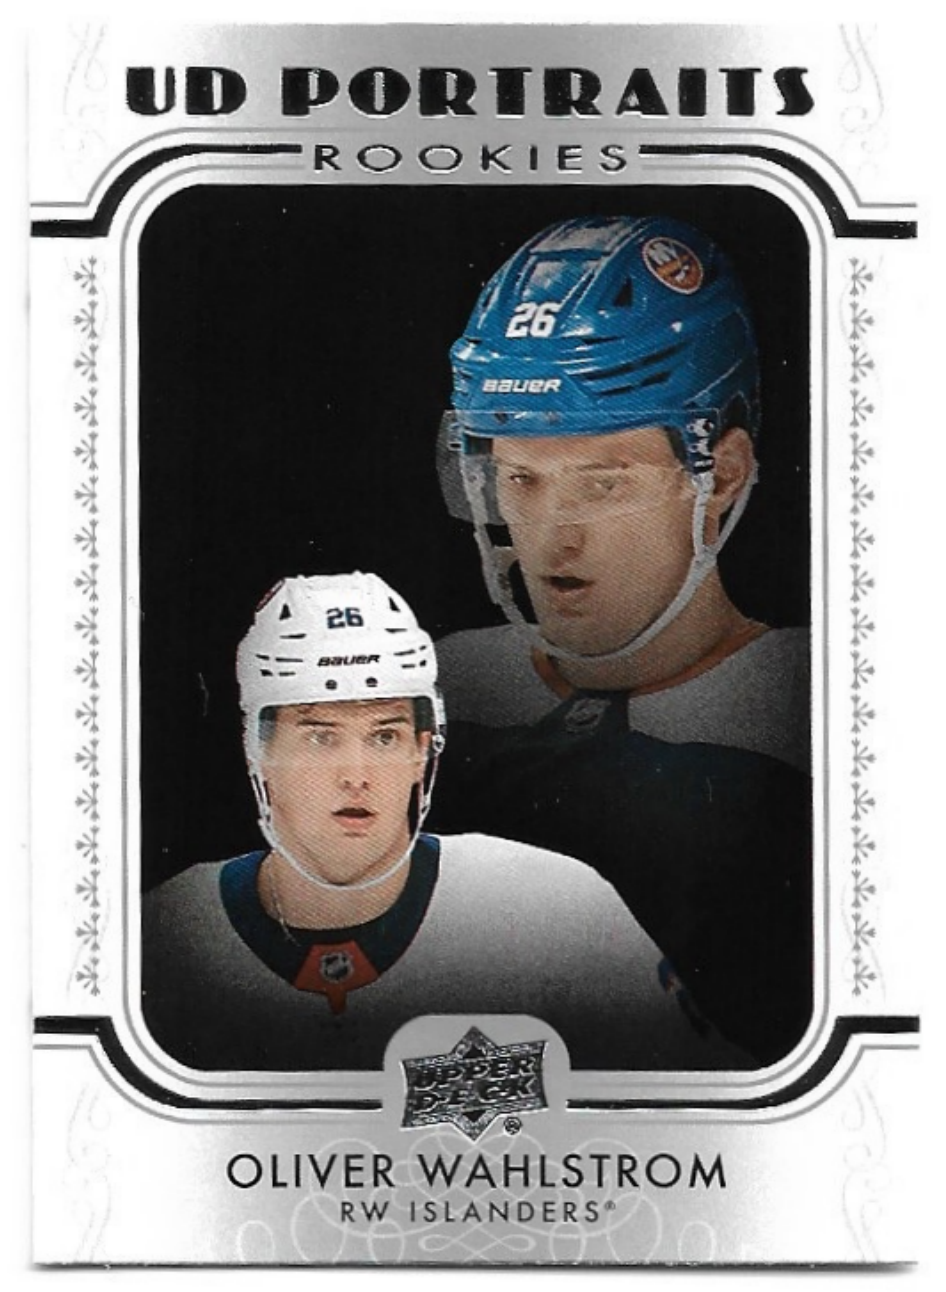 Rookie UD Portraits OLIVER WAHLSTROM 19-20 Series 2